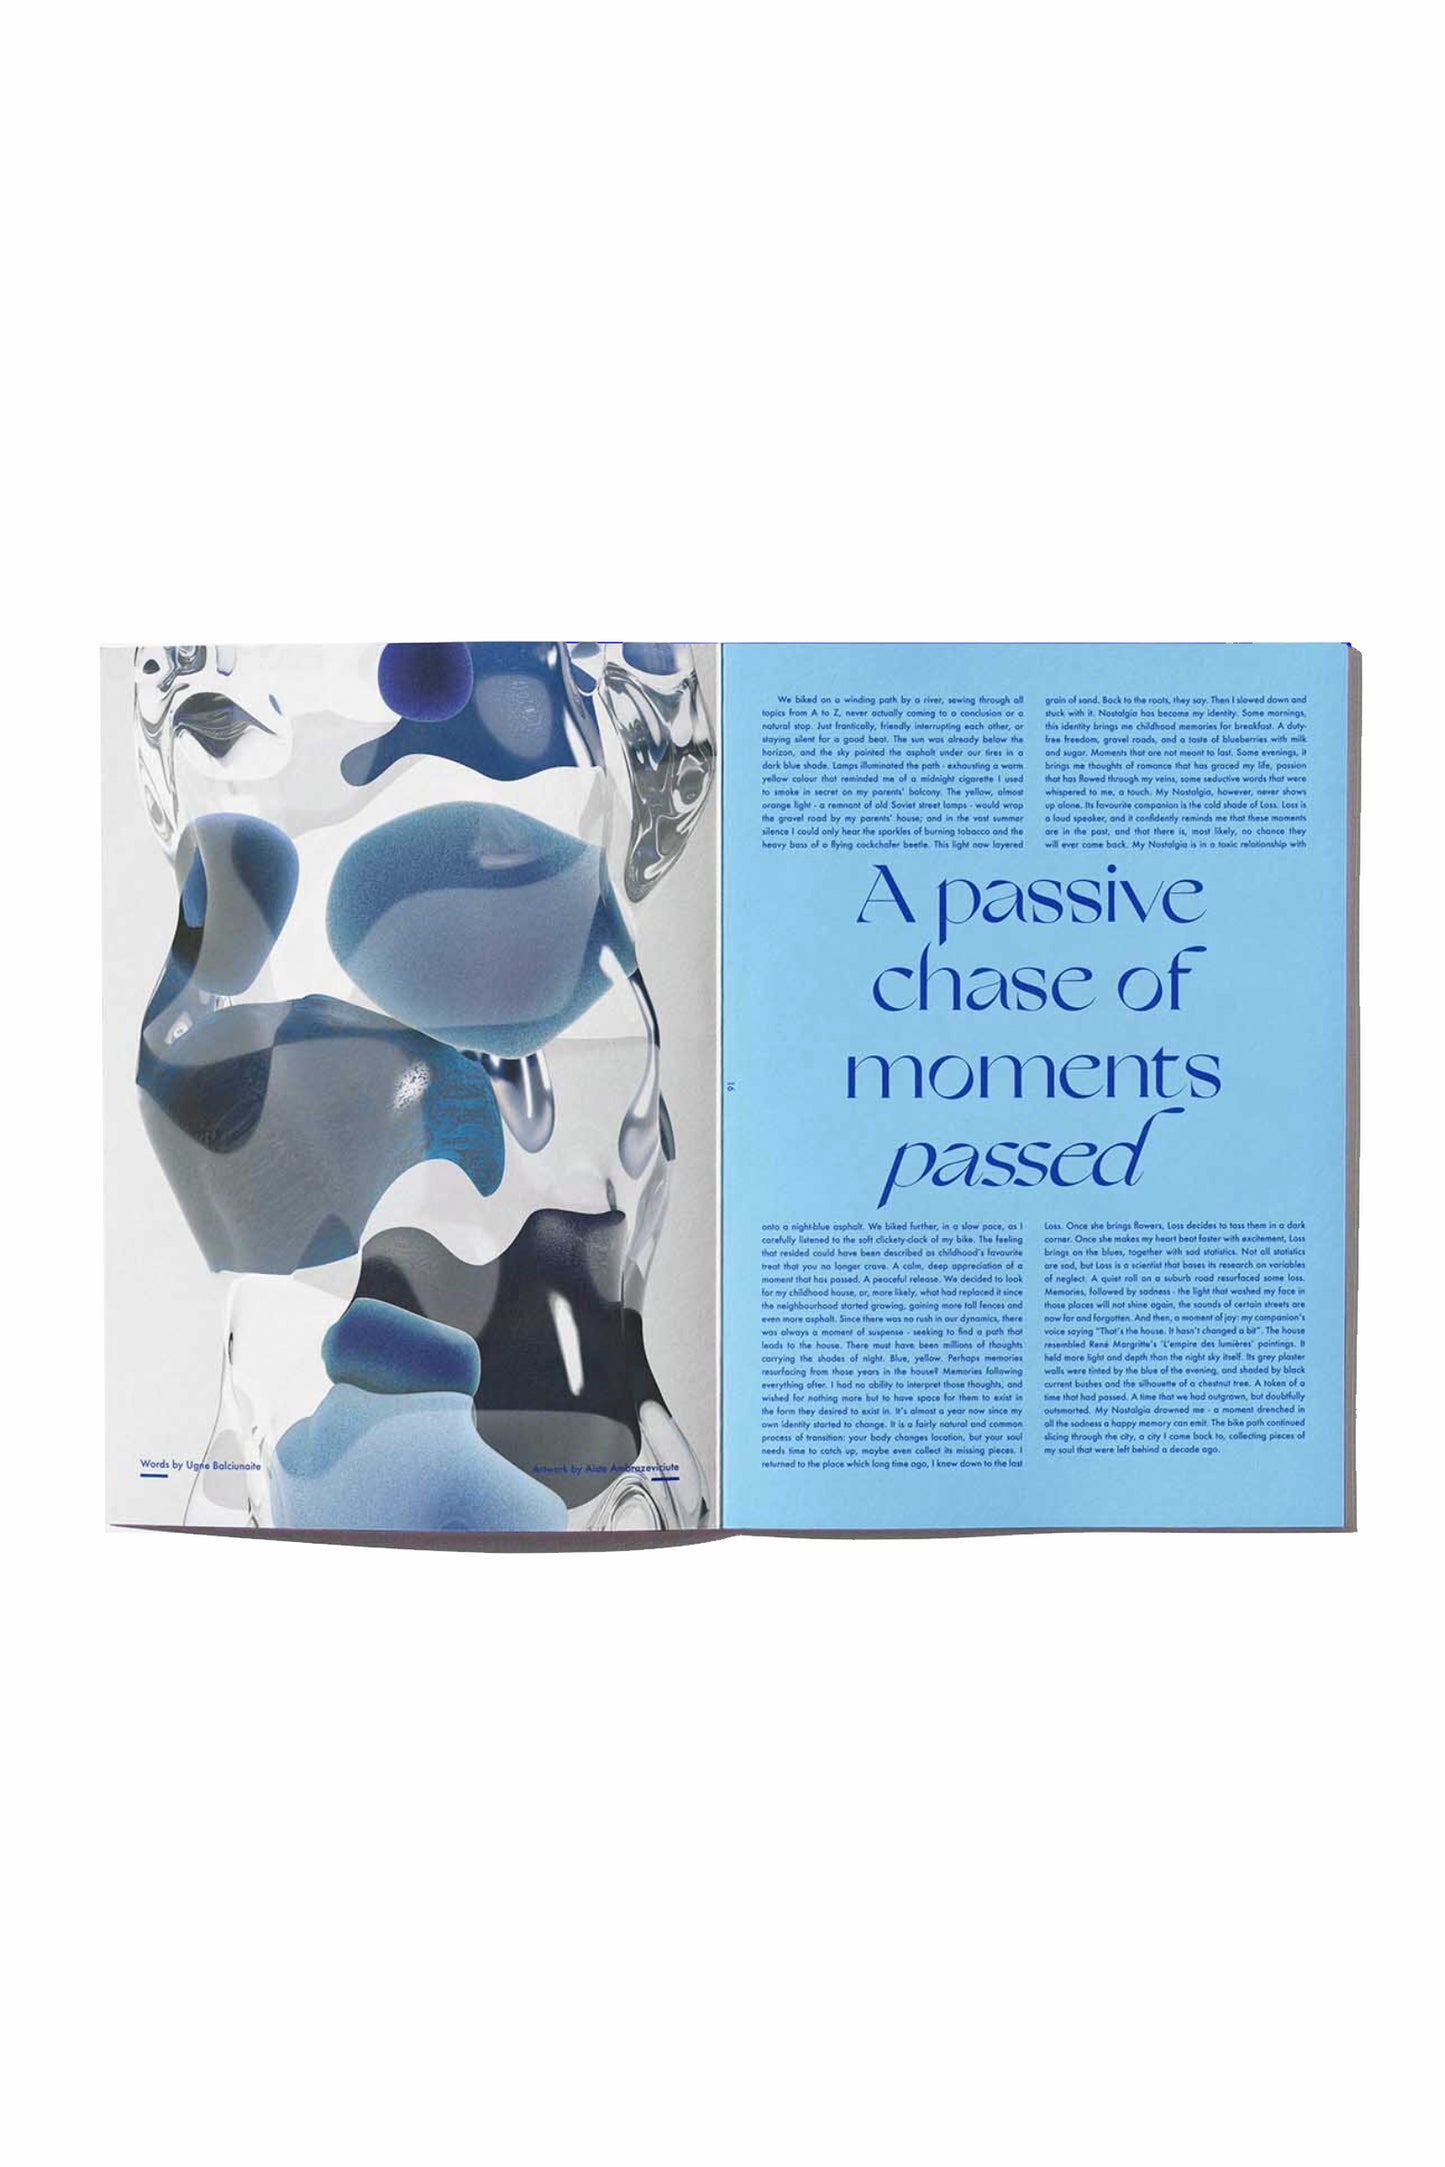 SINDROMS MAG Blue issue